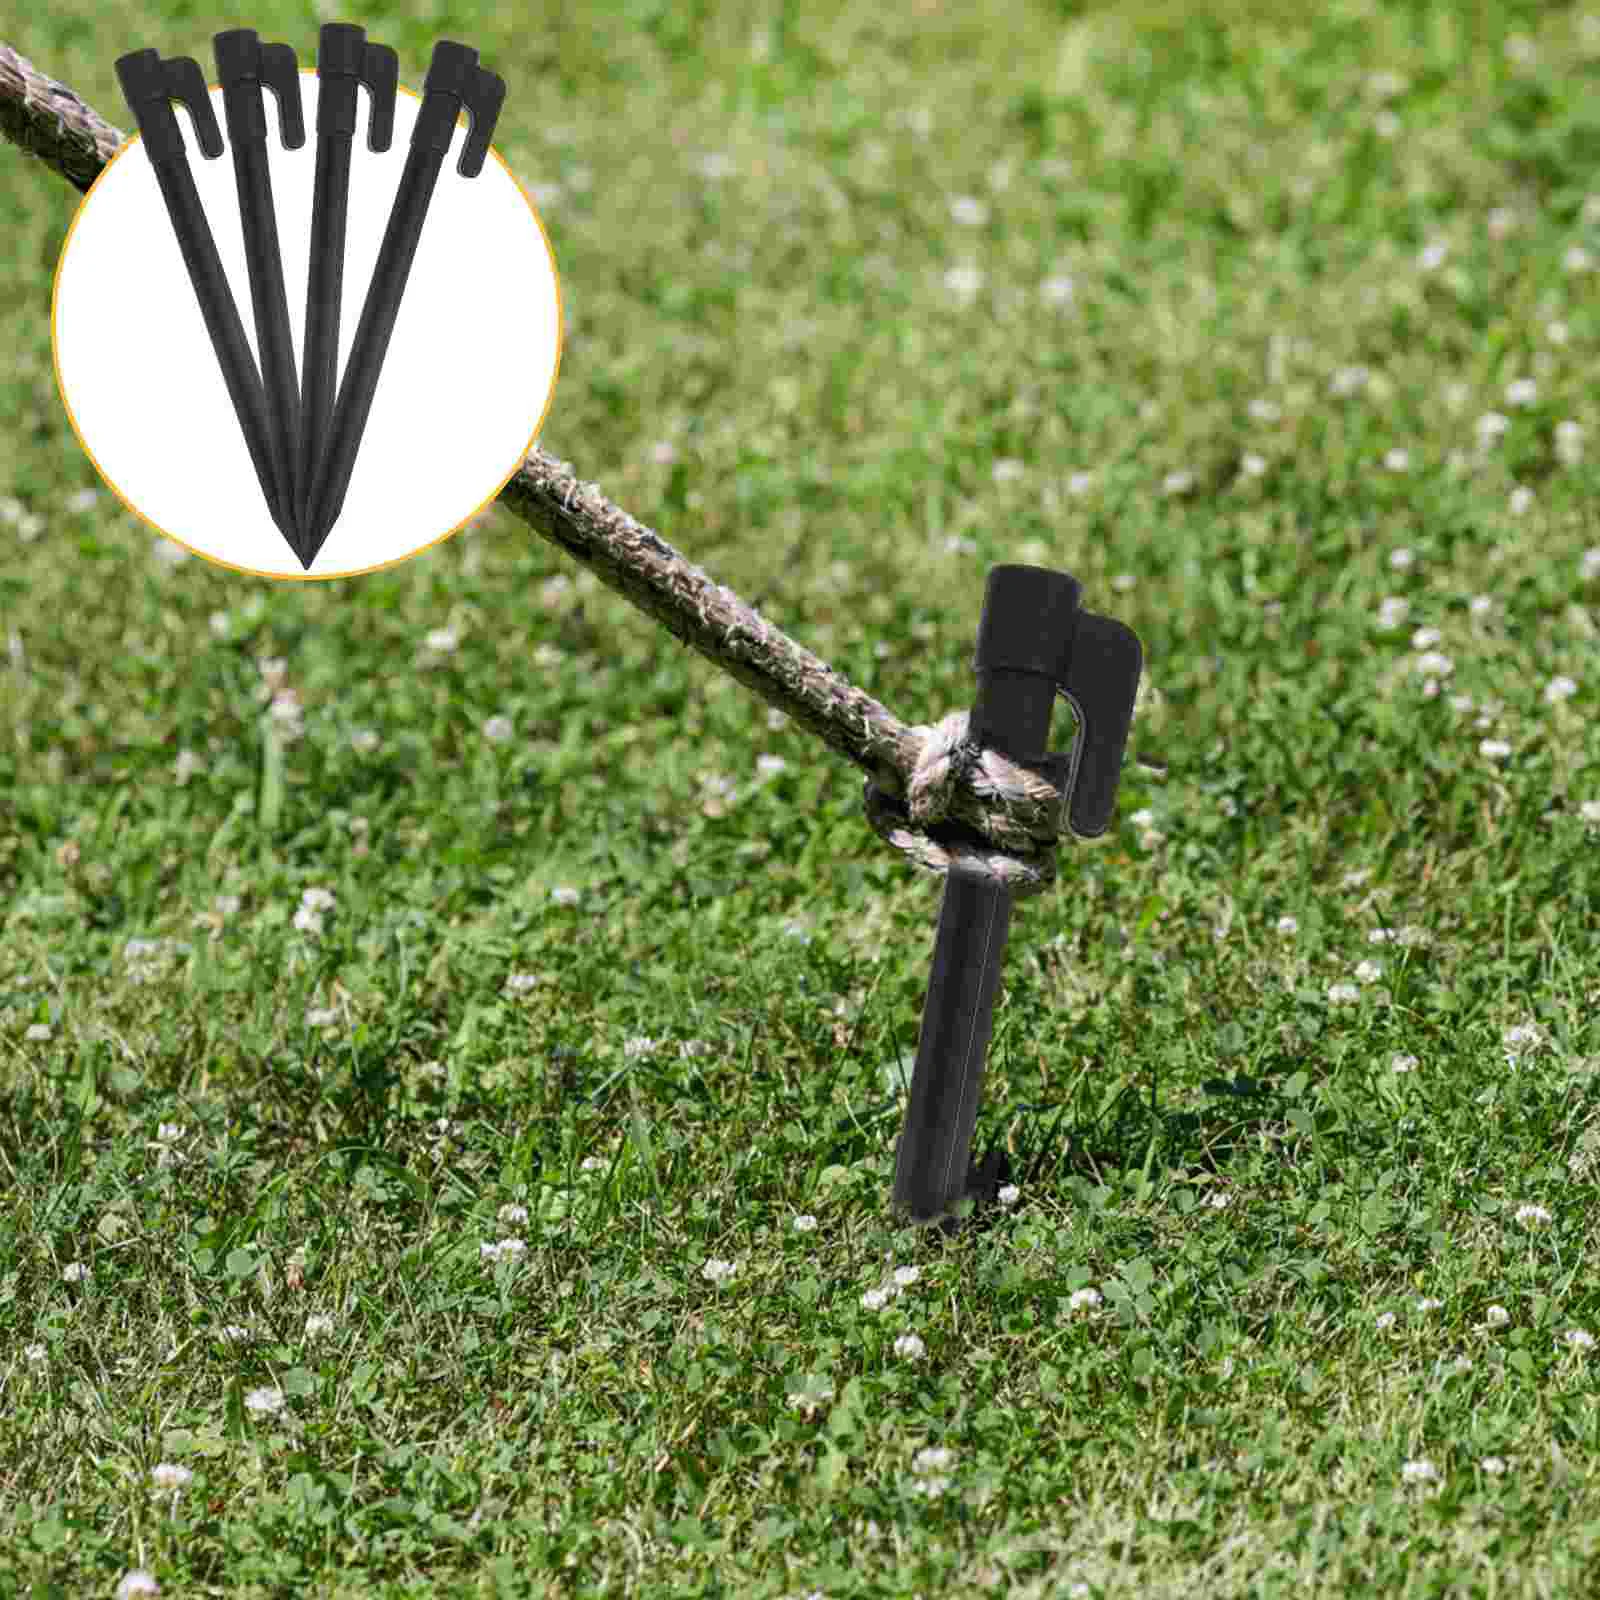 

30 Pcs Garden Pile Heavy Duty Tent Stakes Pegs Ground Portable Heavy Duty Home Fiberglass Rod Canopy Nails Camping Tool